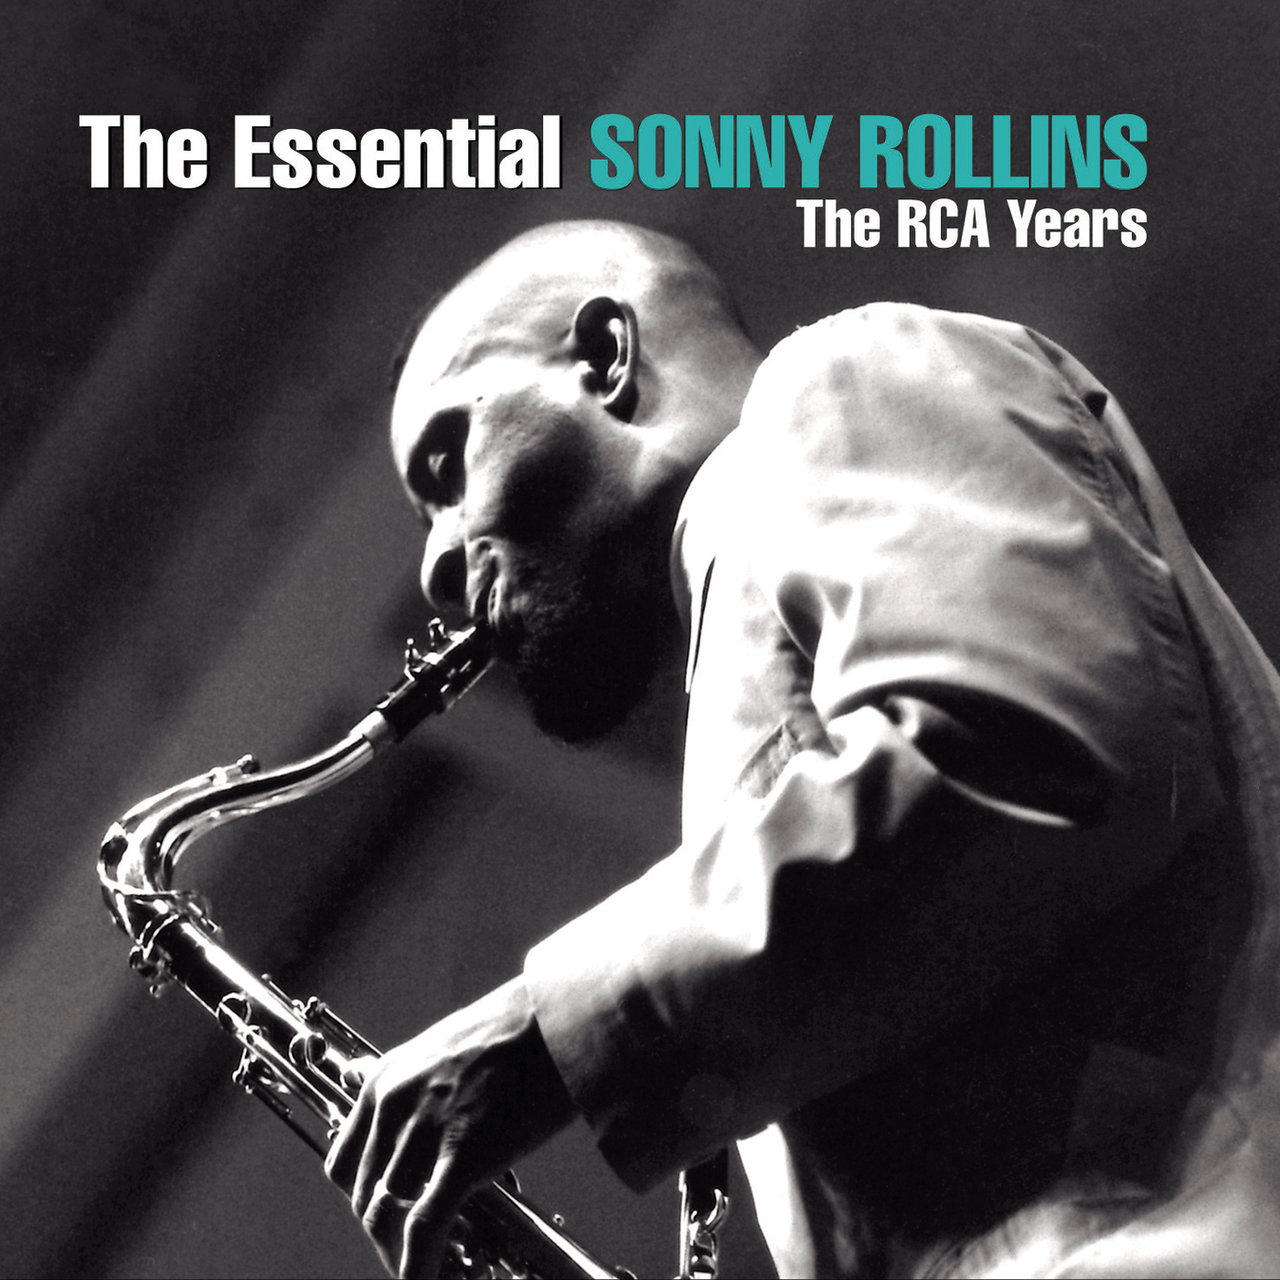 The Essential Sonny Rollins- The RCA Years [2005]